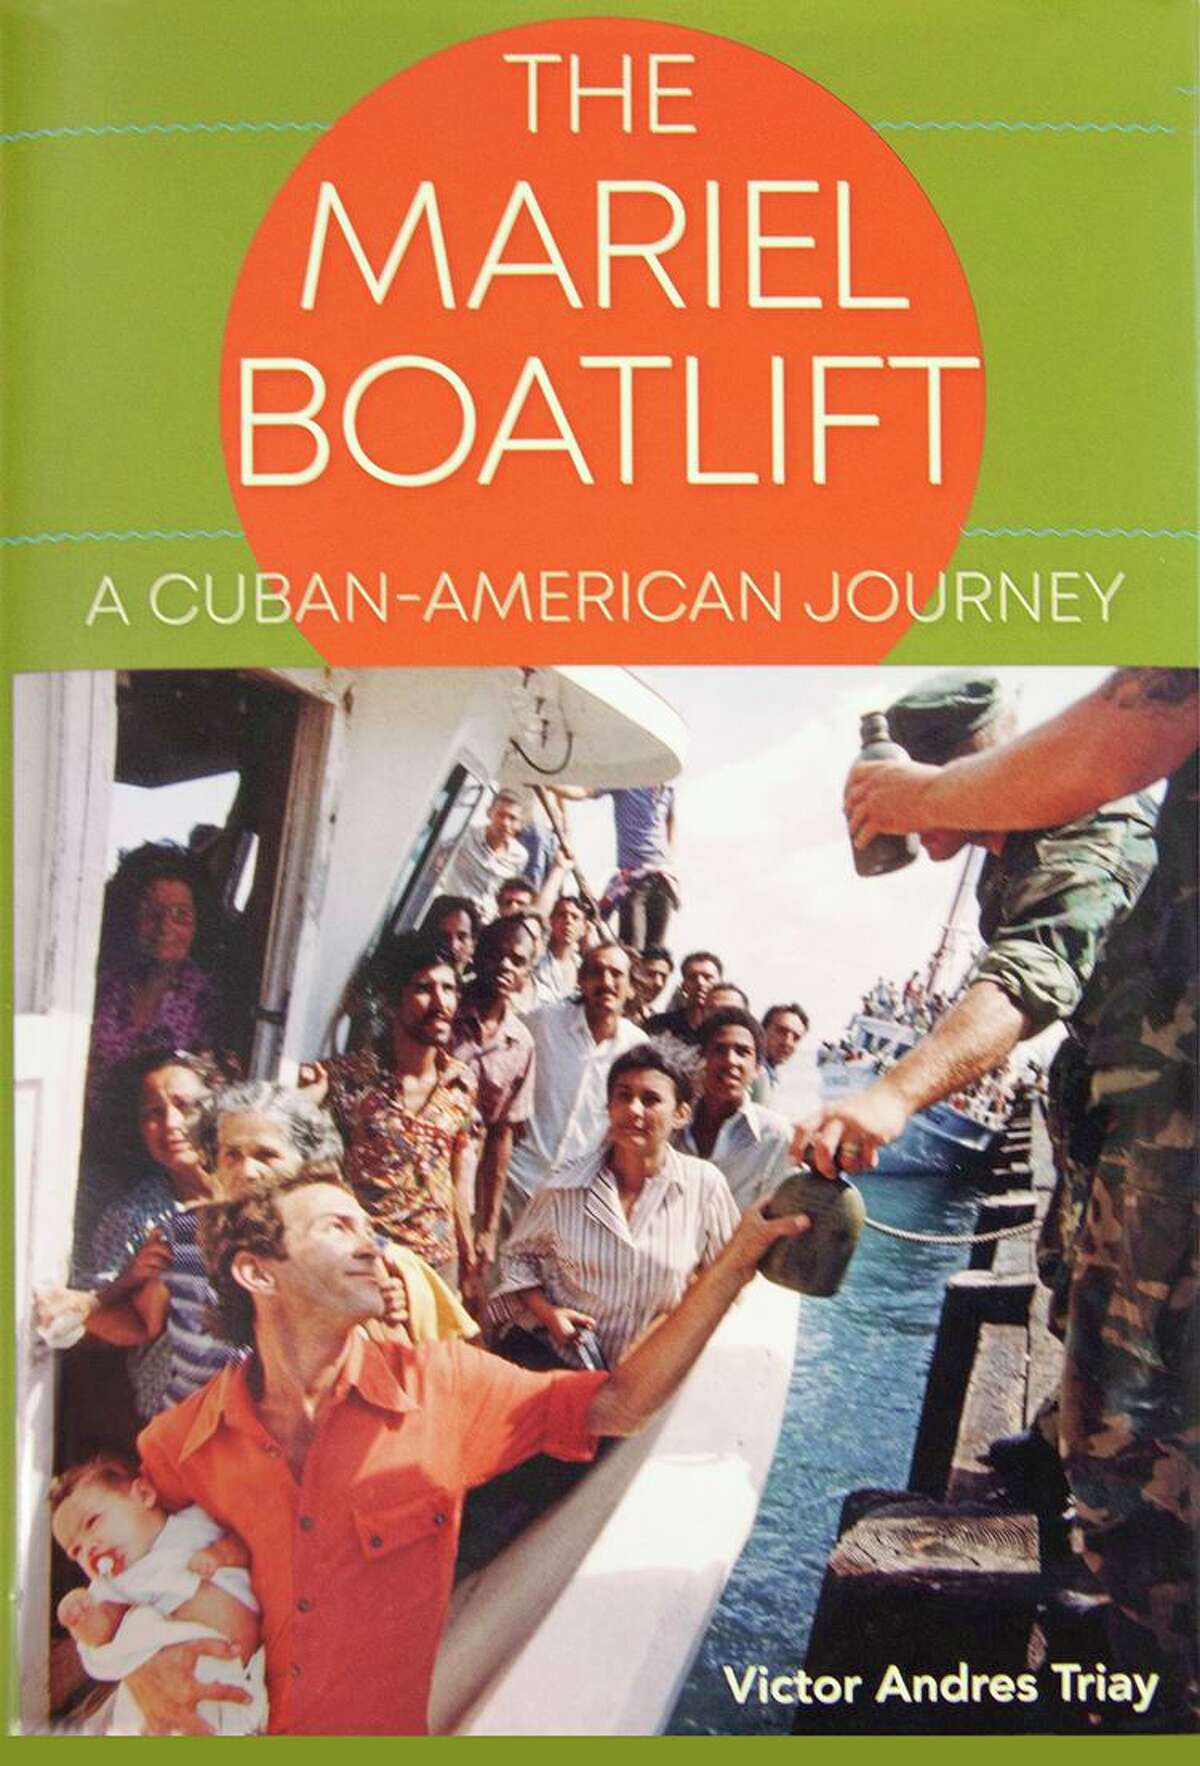 Victor Triay is the author of the award-winning book, “The Mariel Boatlift: A Cuban-American Journey.”